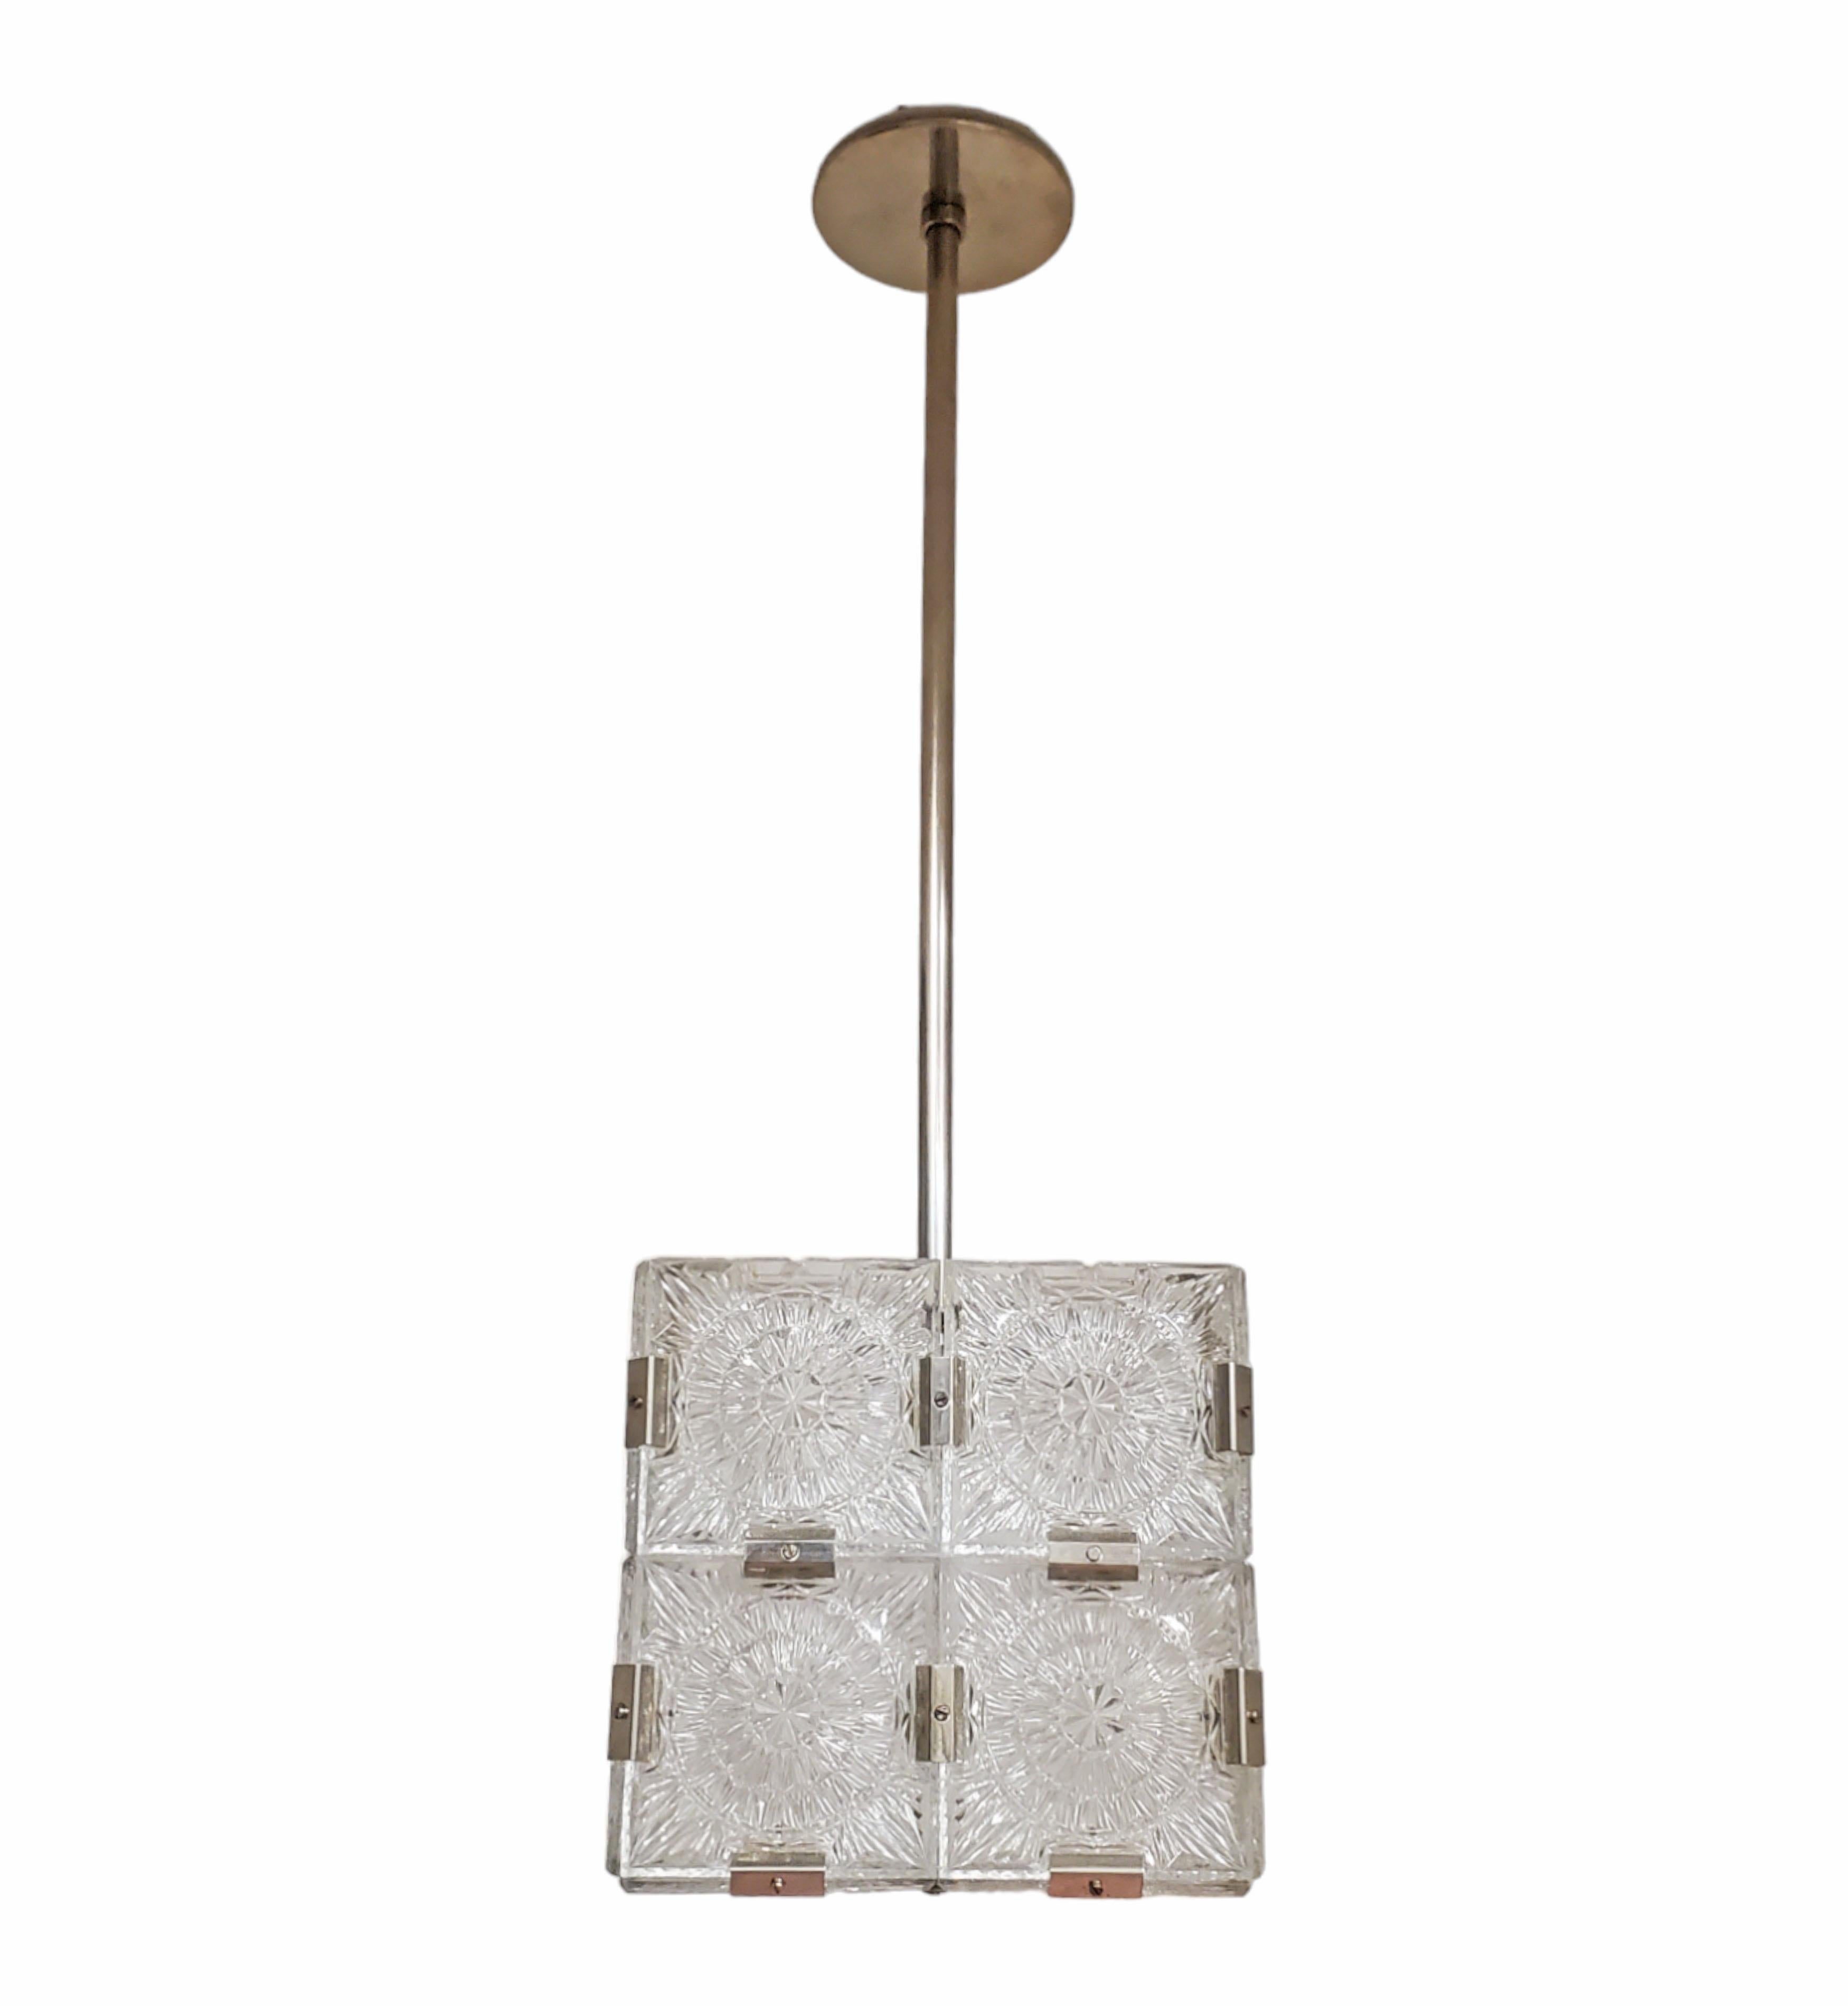 
Price listed is per one fixture.
Set of ten Modernist square chandeliers each fixture comprises 20 small squares of cut-glass in two tiers formed together with original nickeled bronze brackets. The juxtaposition of the circular patterns in the